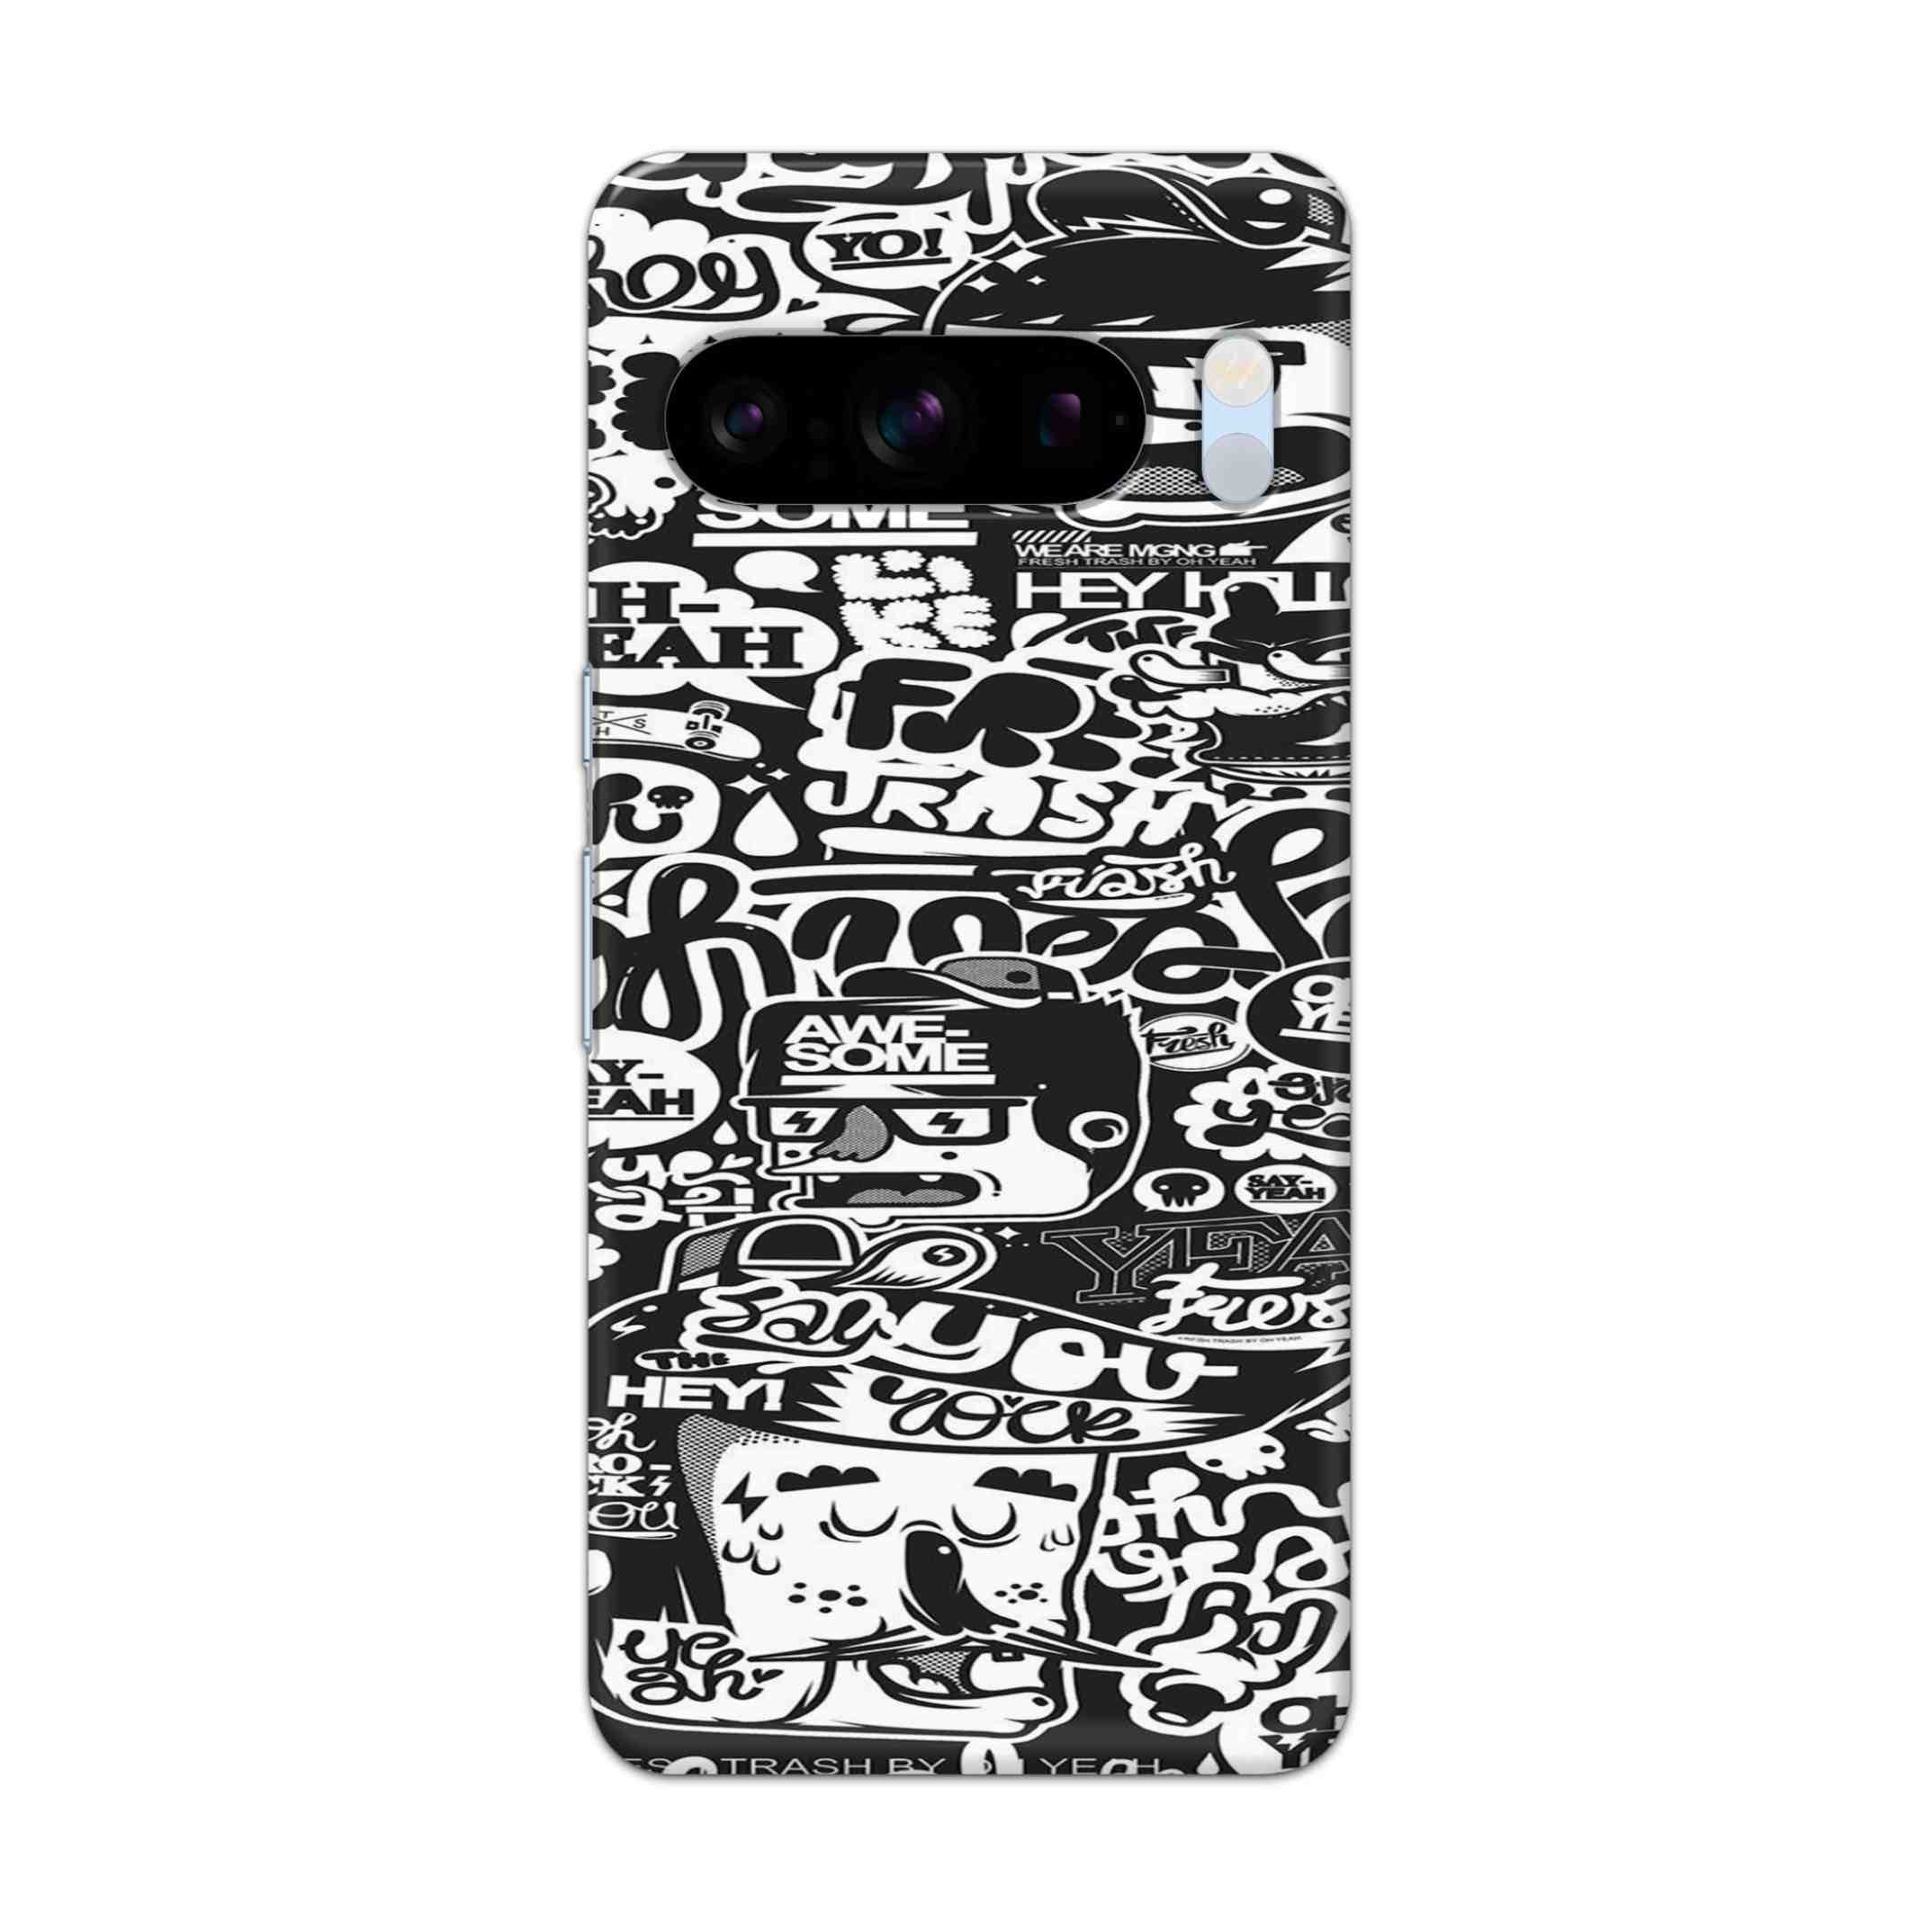 Buy Awesome Hard Back Mobile Phone Case/Cover For Pixel 8 Pro Online